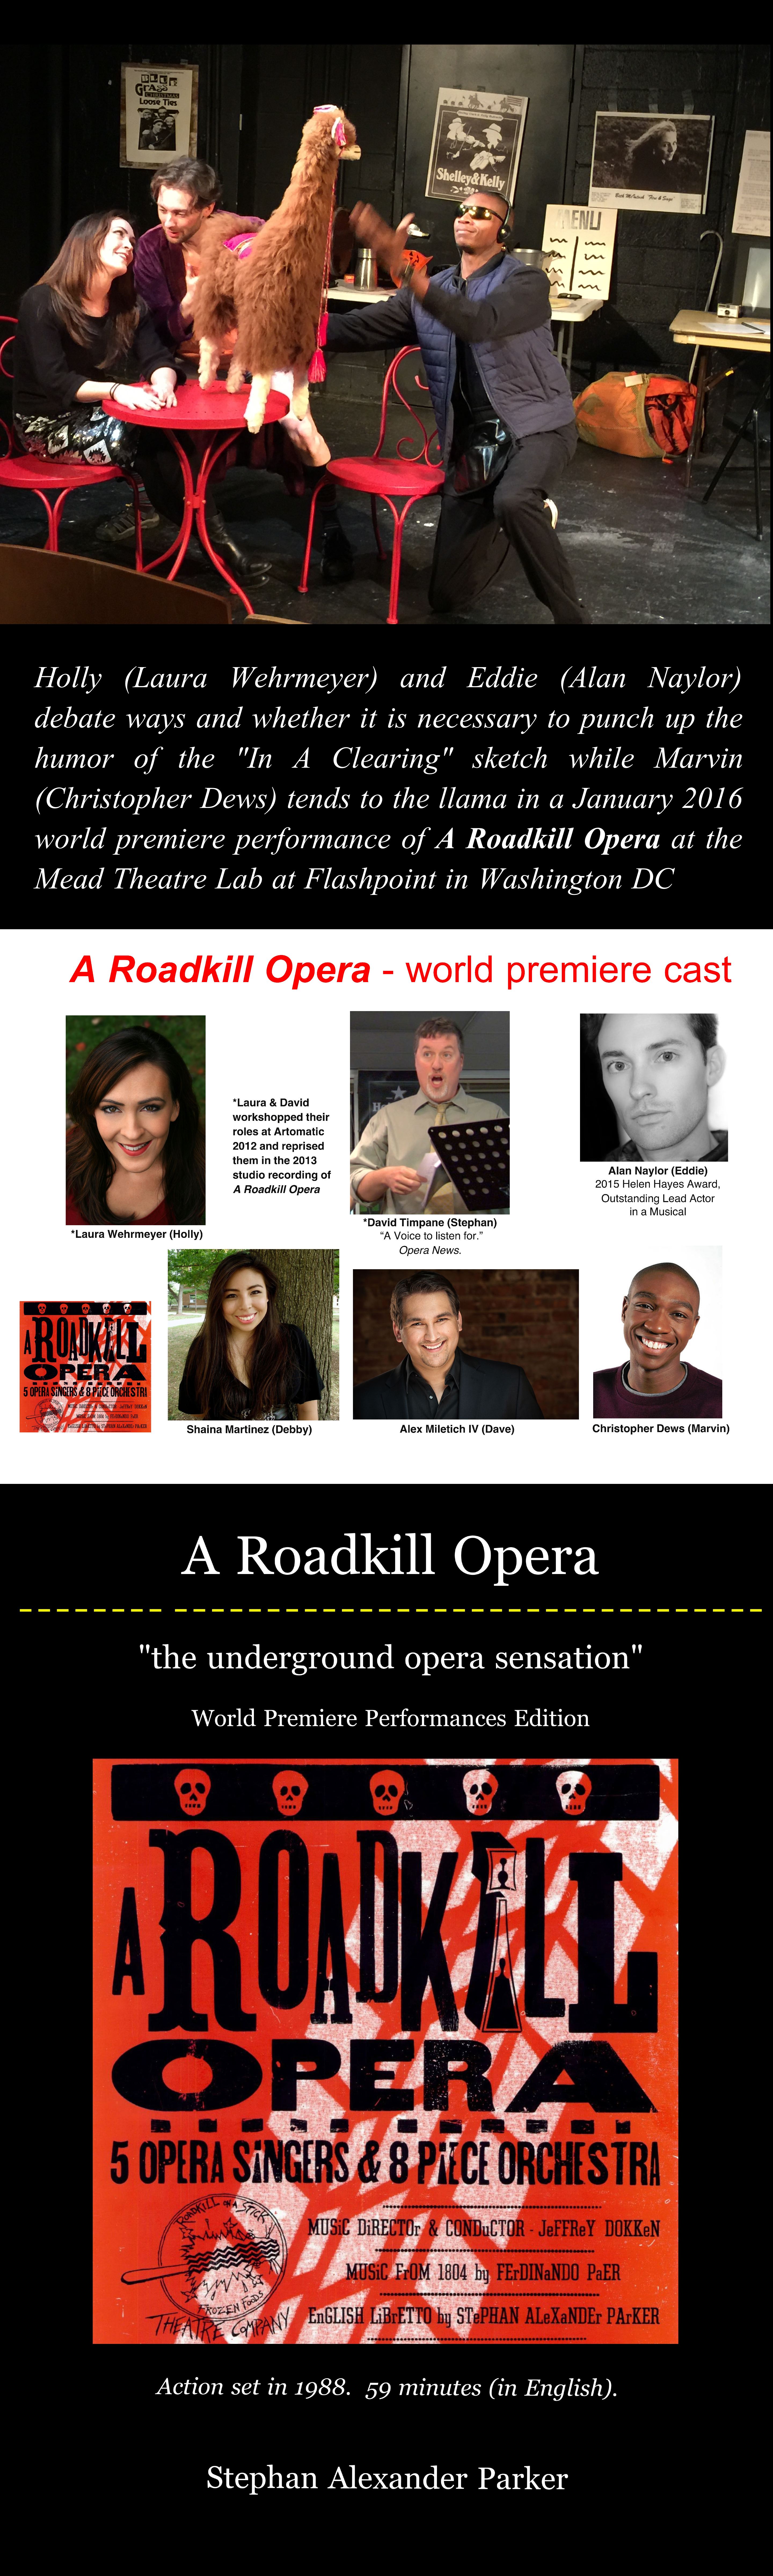 Banner showing the cover of the libretto for A Roadkill Opera, above which are the lobby card showing the cast and an action photo from the January 2016 world premiere performances at the Mead Theatre Lab at Flashpoint in Washington, Dc 